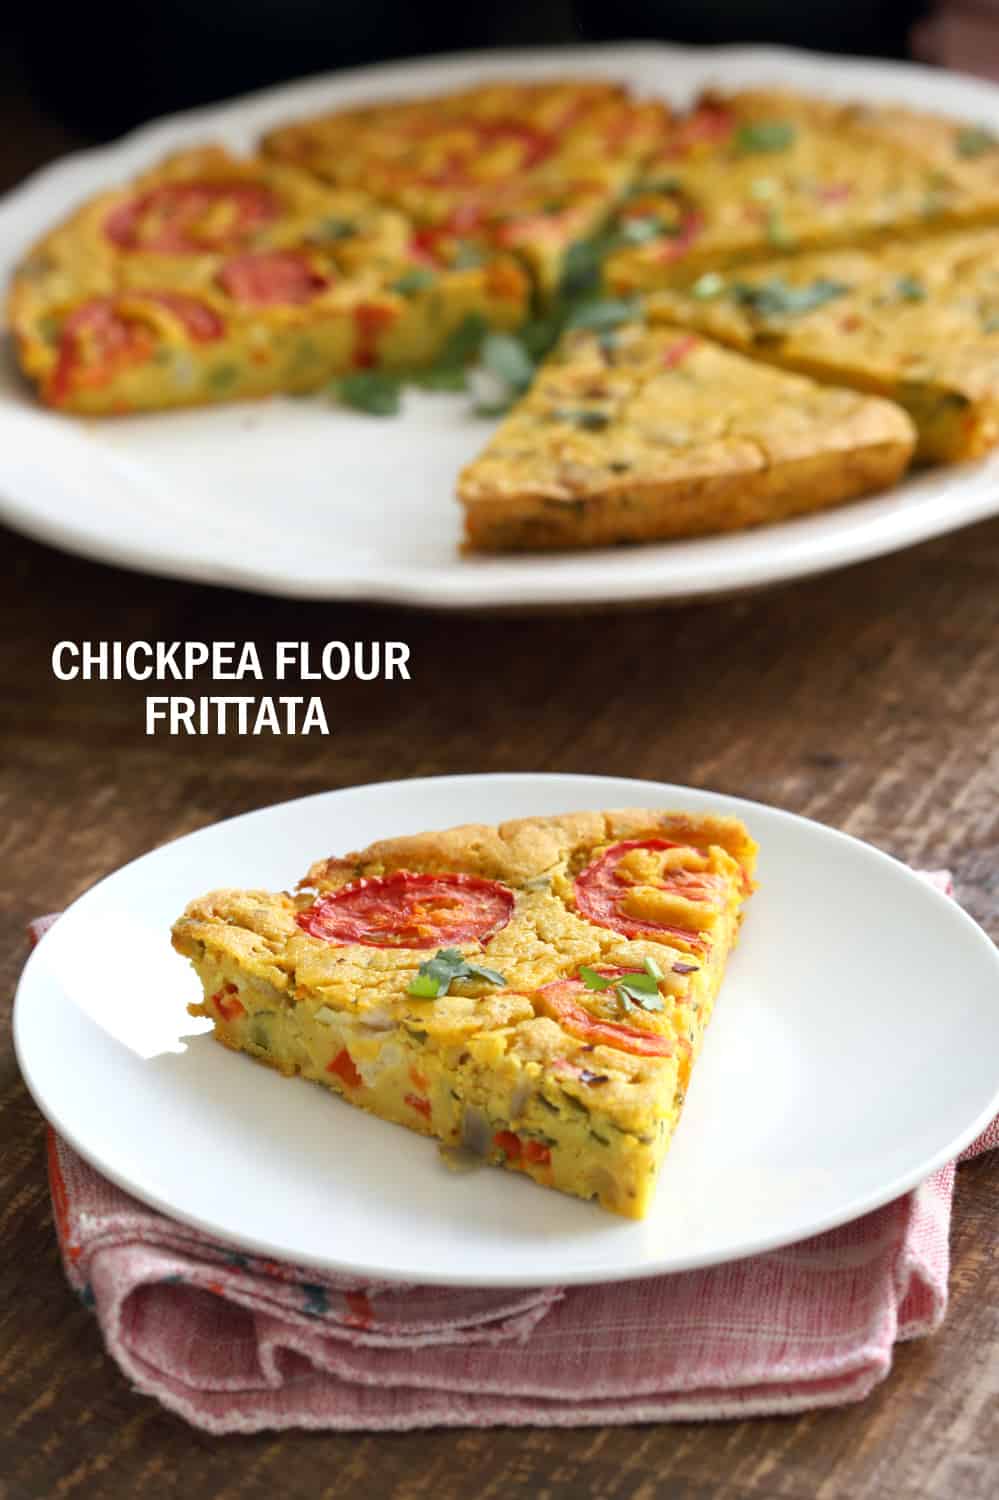 slice of chickpea frittata on a plate